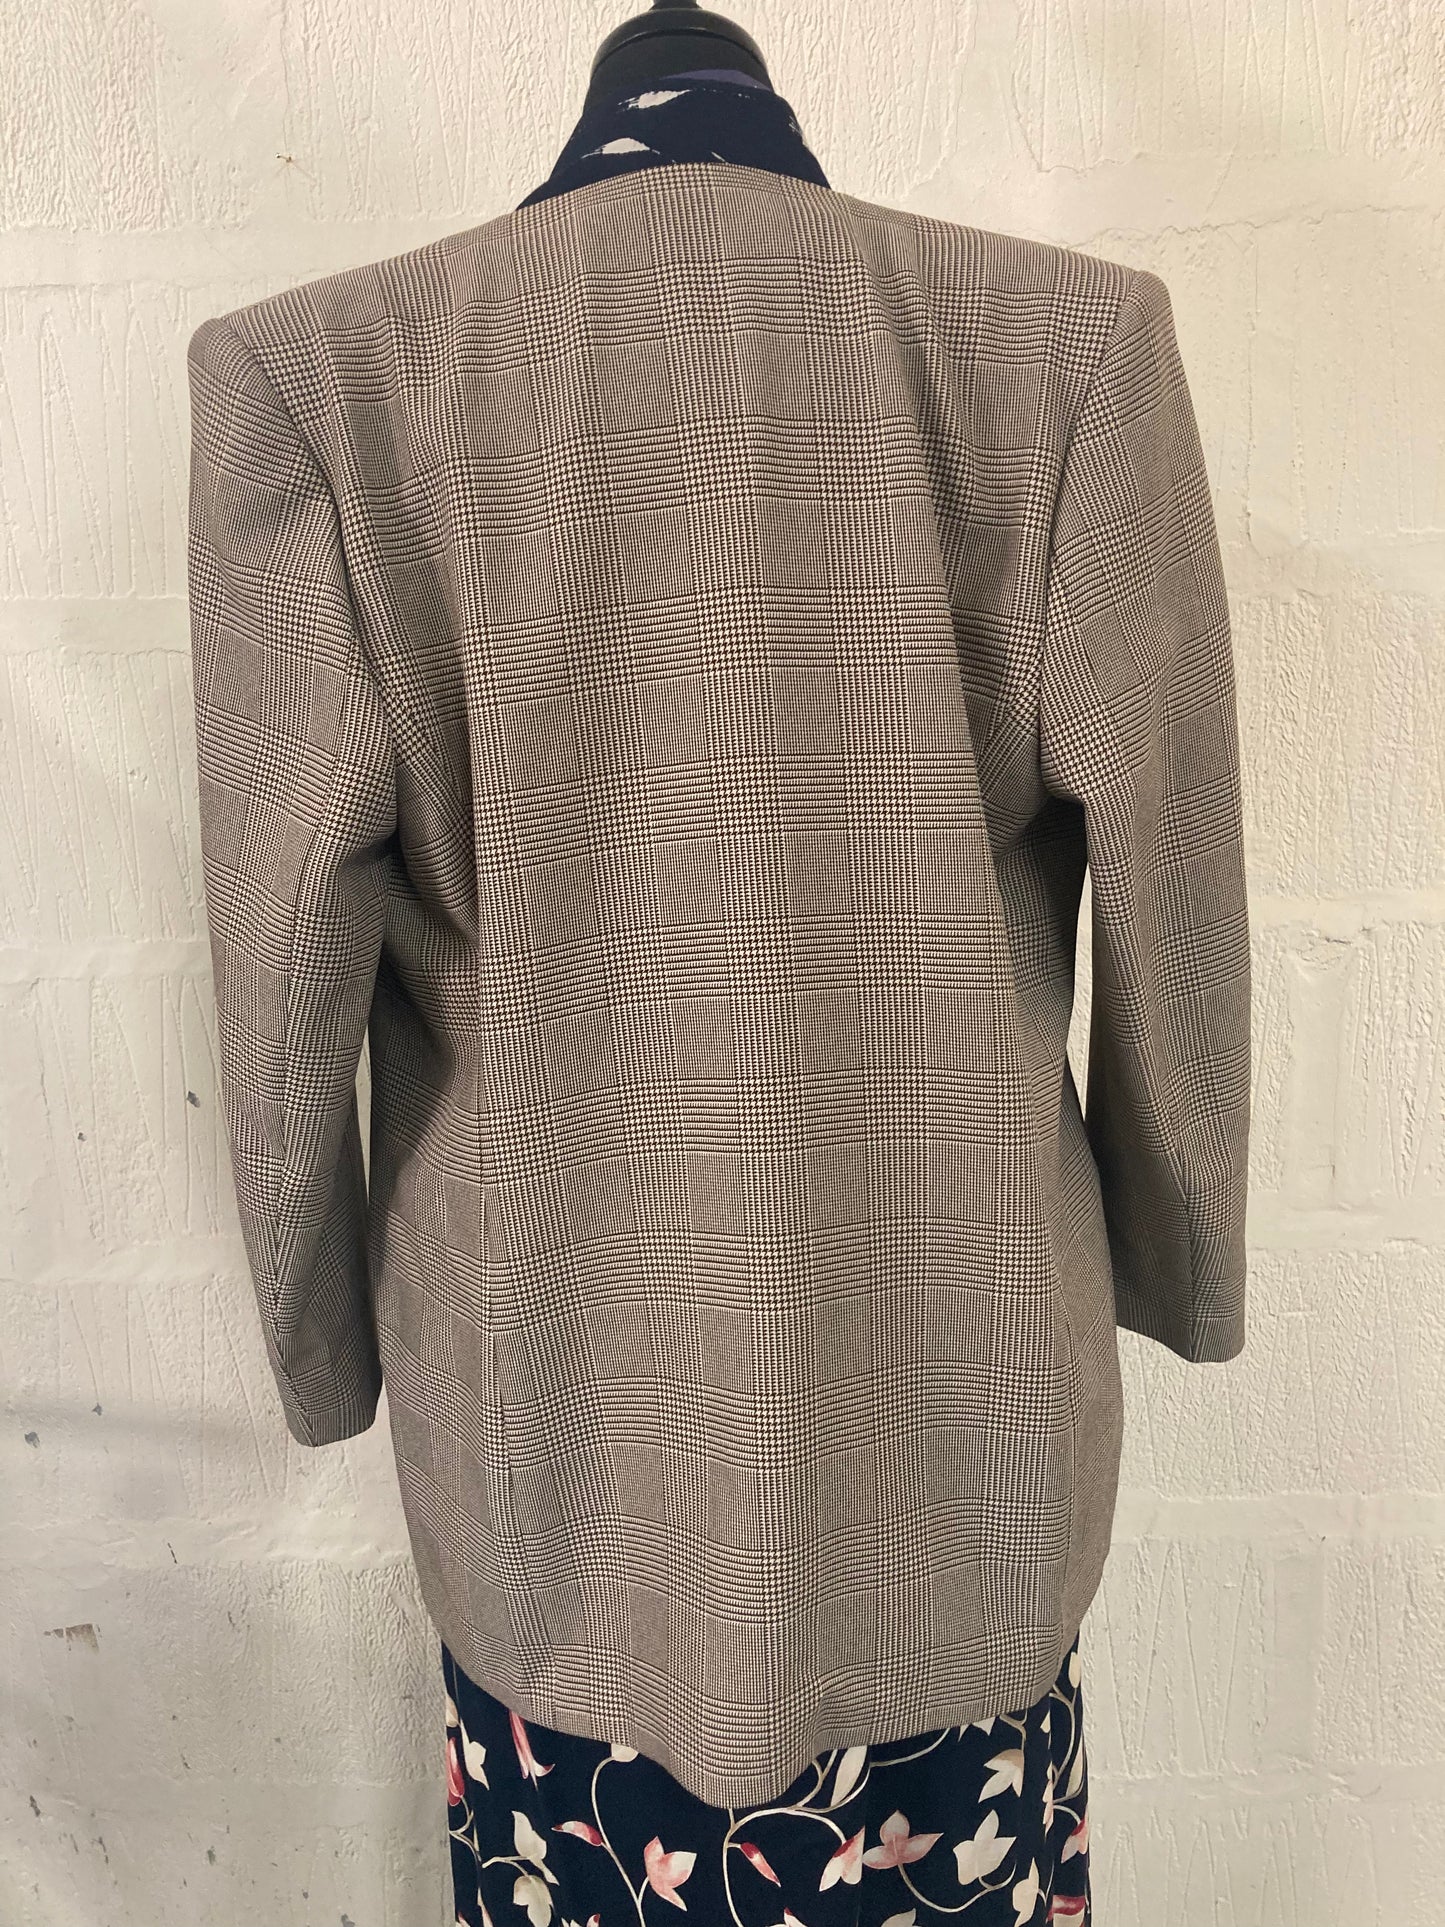 Vintage St Michael Collarless Tan Houndstooth Jacket Size 14